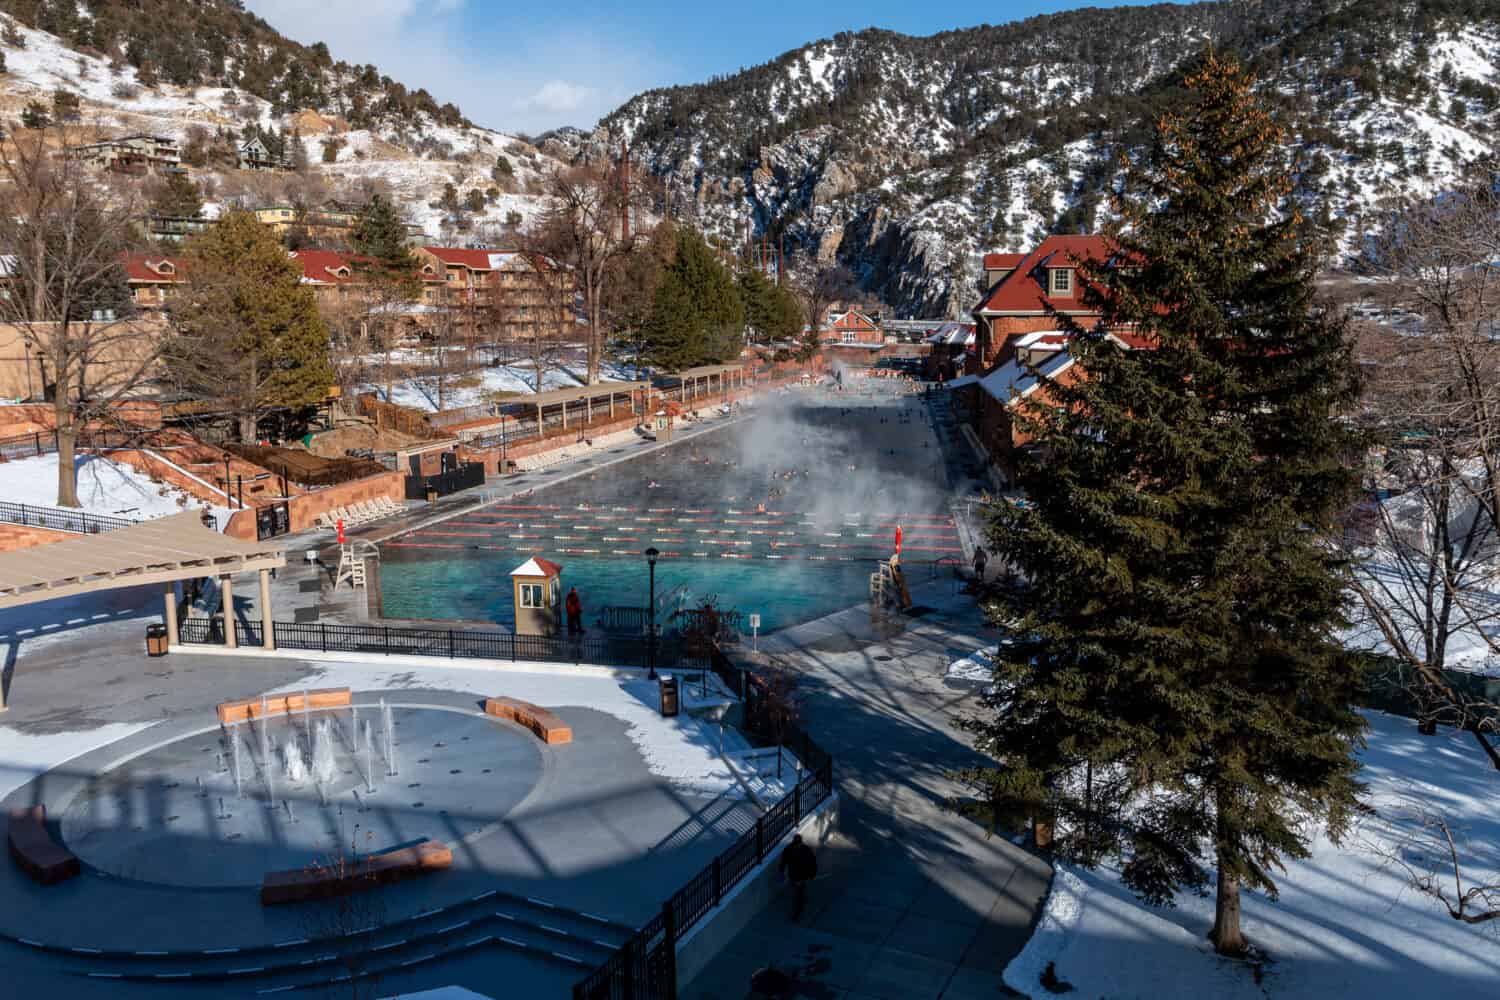 hot springs Glenwood Springs is the largest rocky mountain in the world